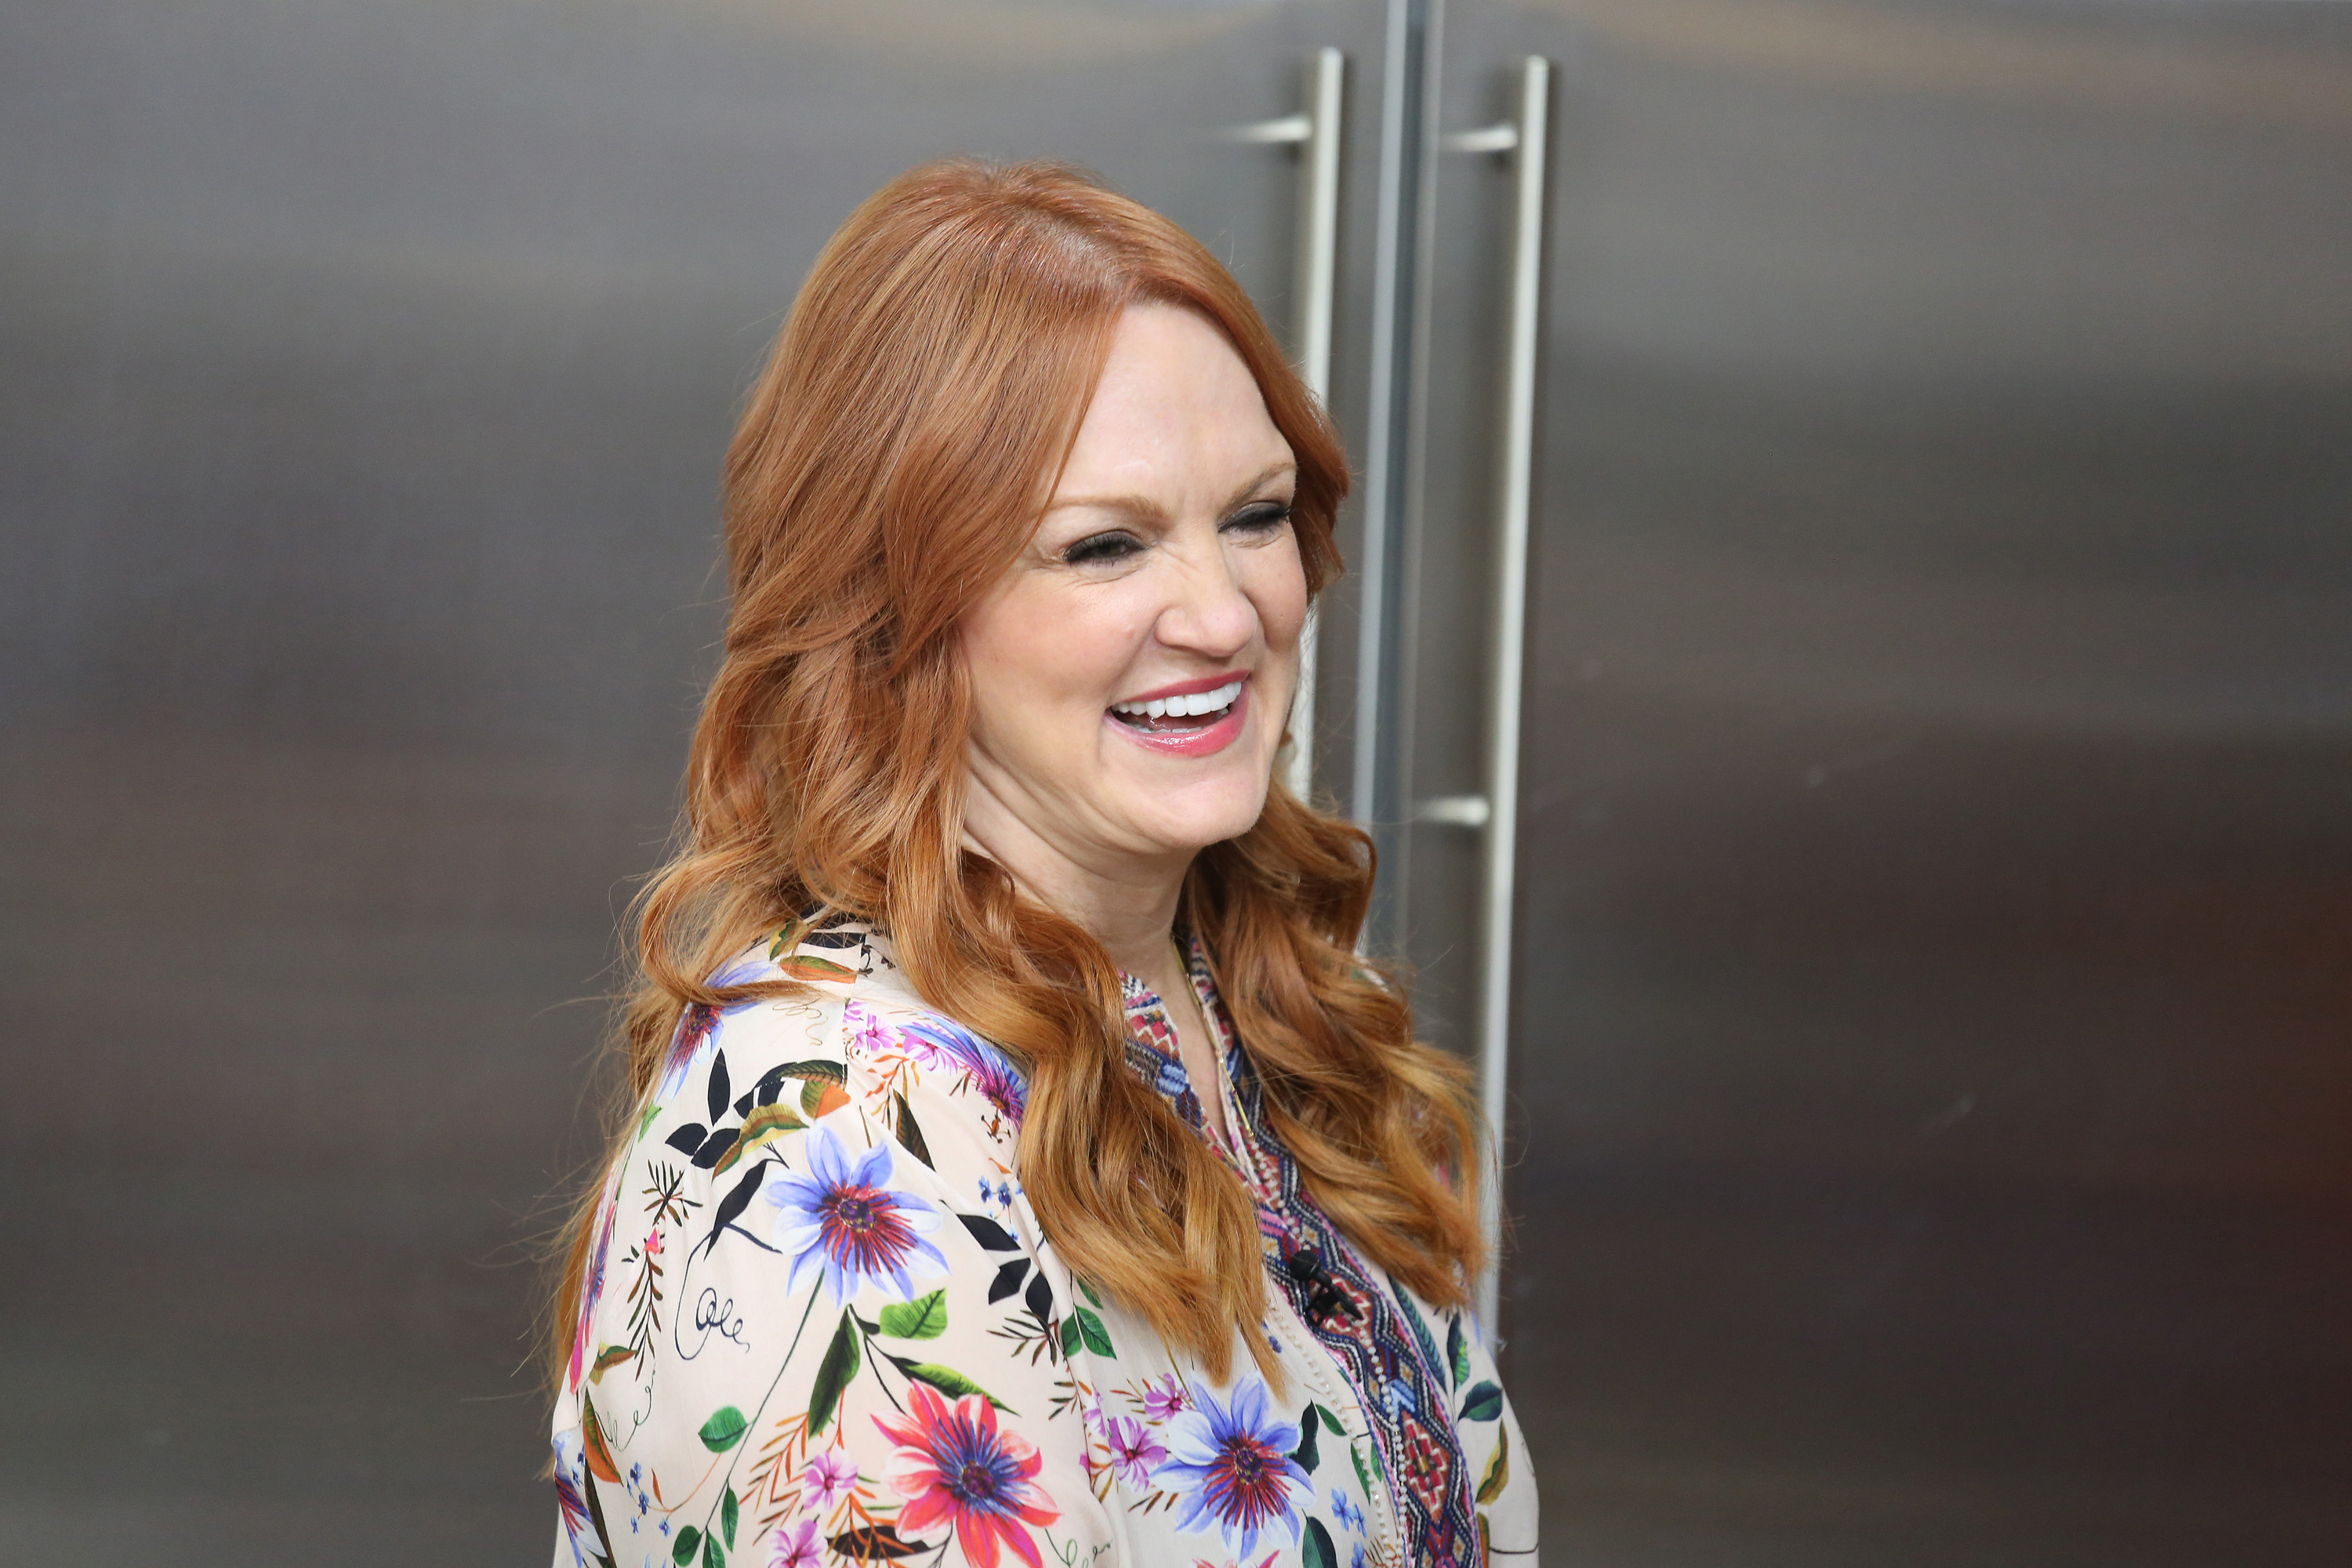 'The Pioneer Woman' Ree Drummond smiles while wearing a bright colored blouse standing in front of a stainless steel refrigerator